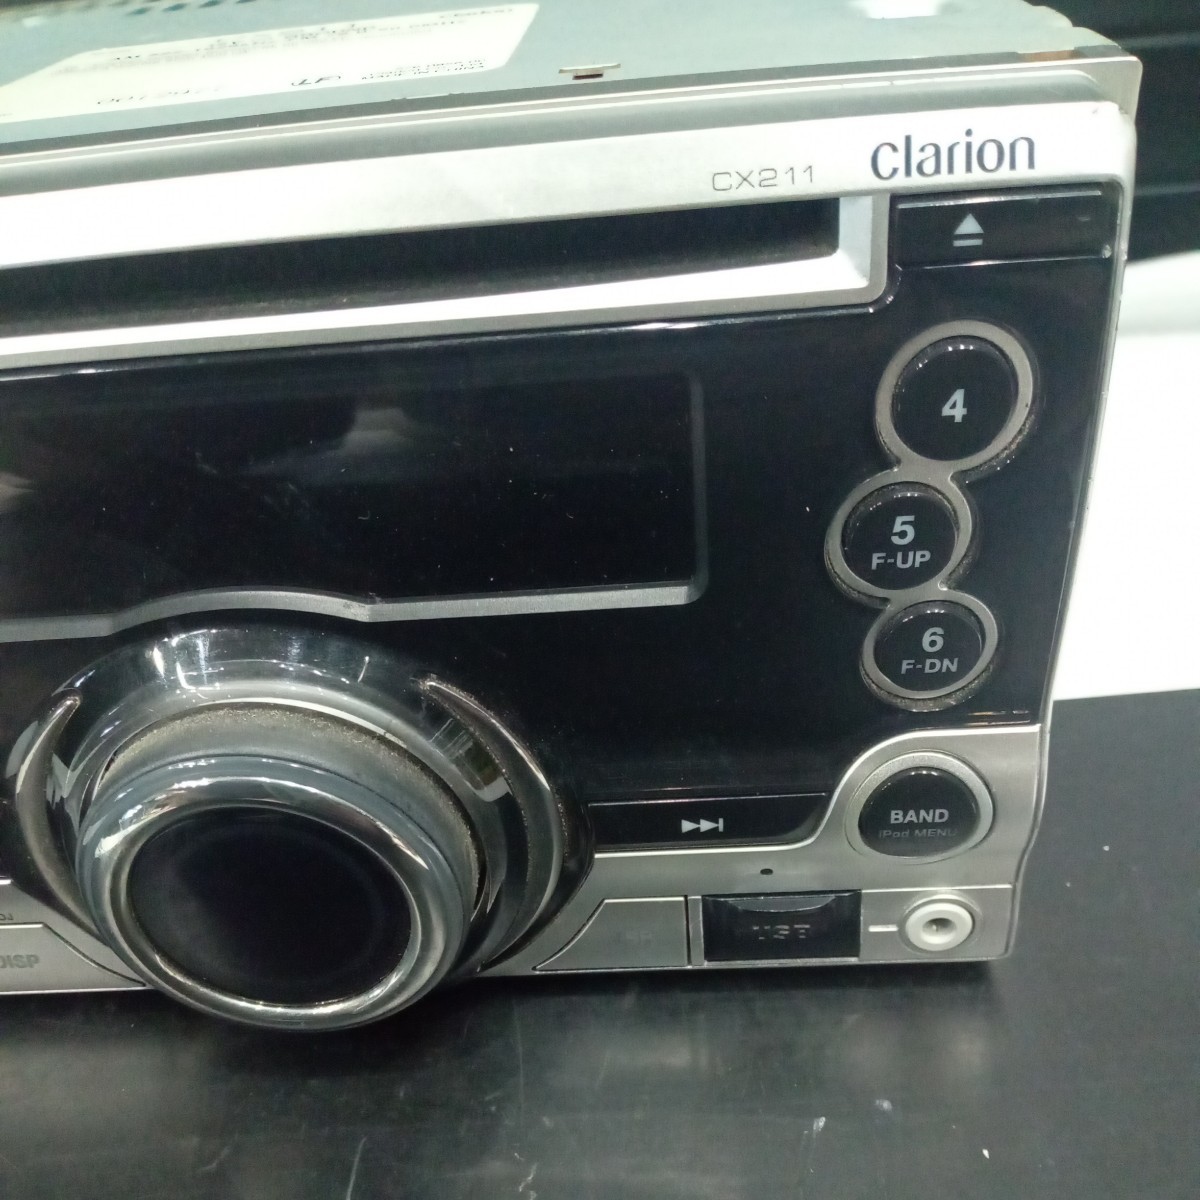 Clarion Clarion CX211 operation not yet verification Junk 